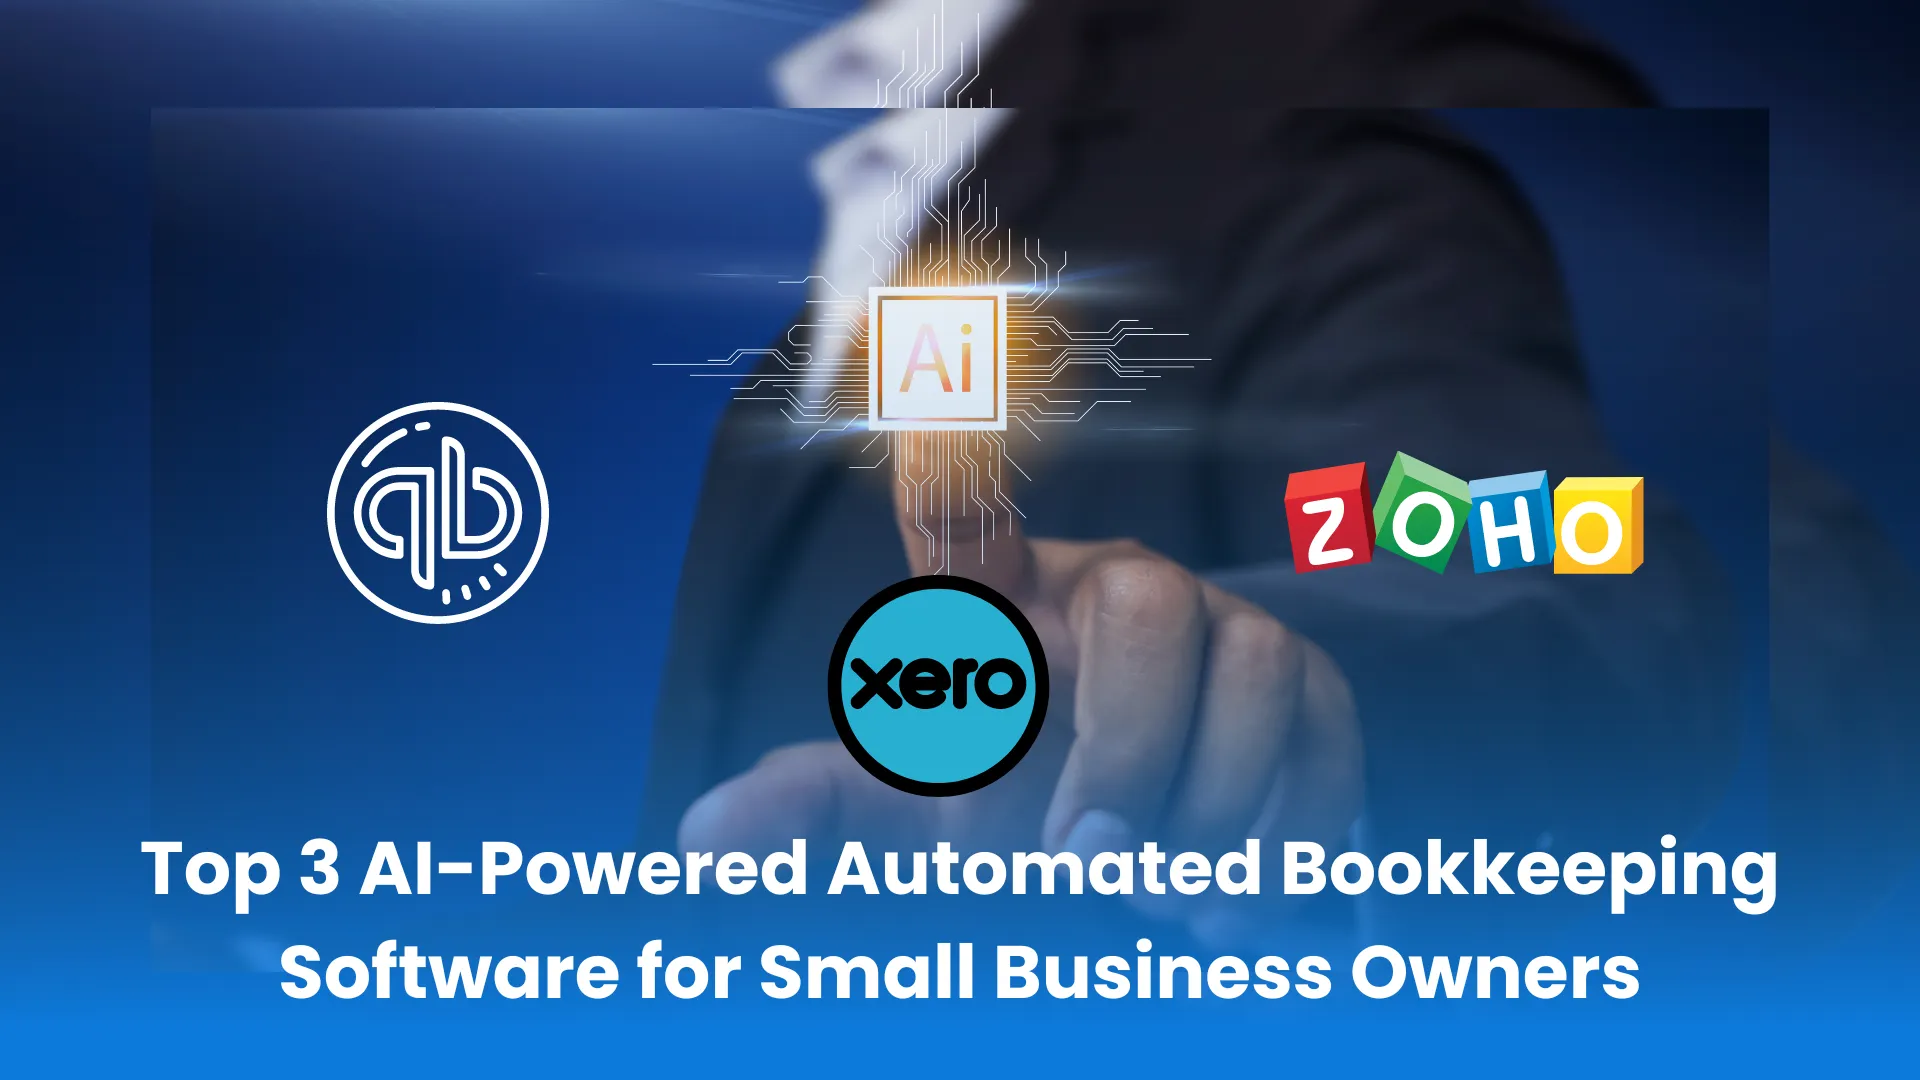 Top ai-powered automated bookkeeping software for small business owners.